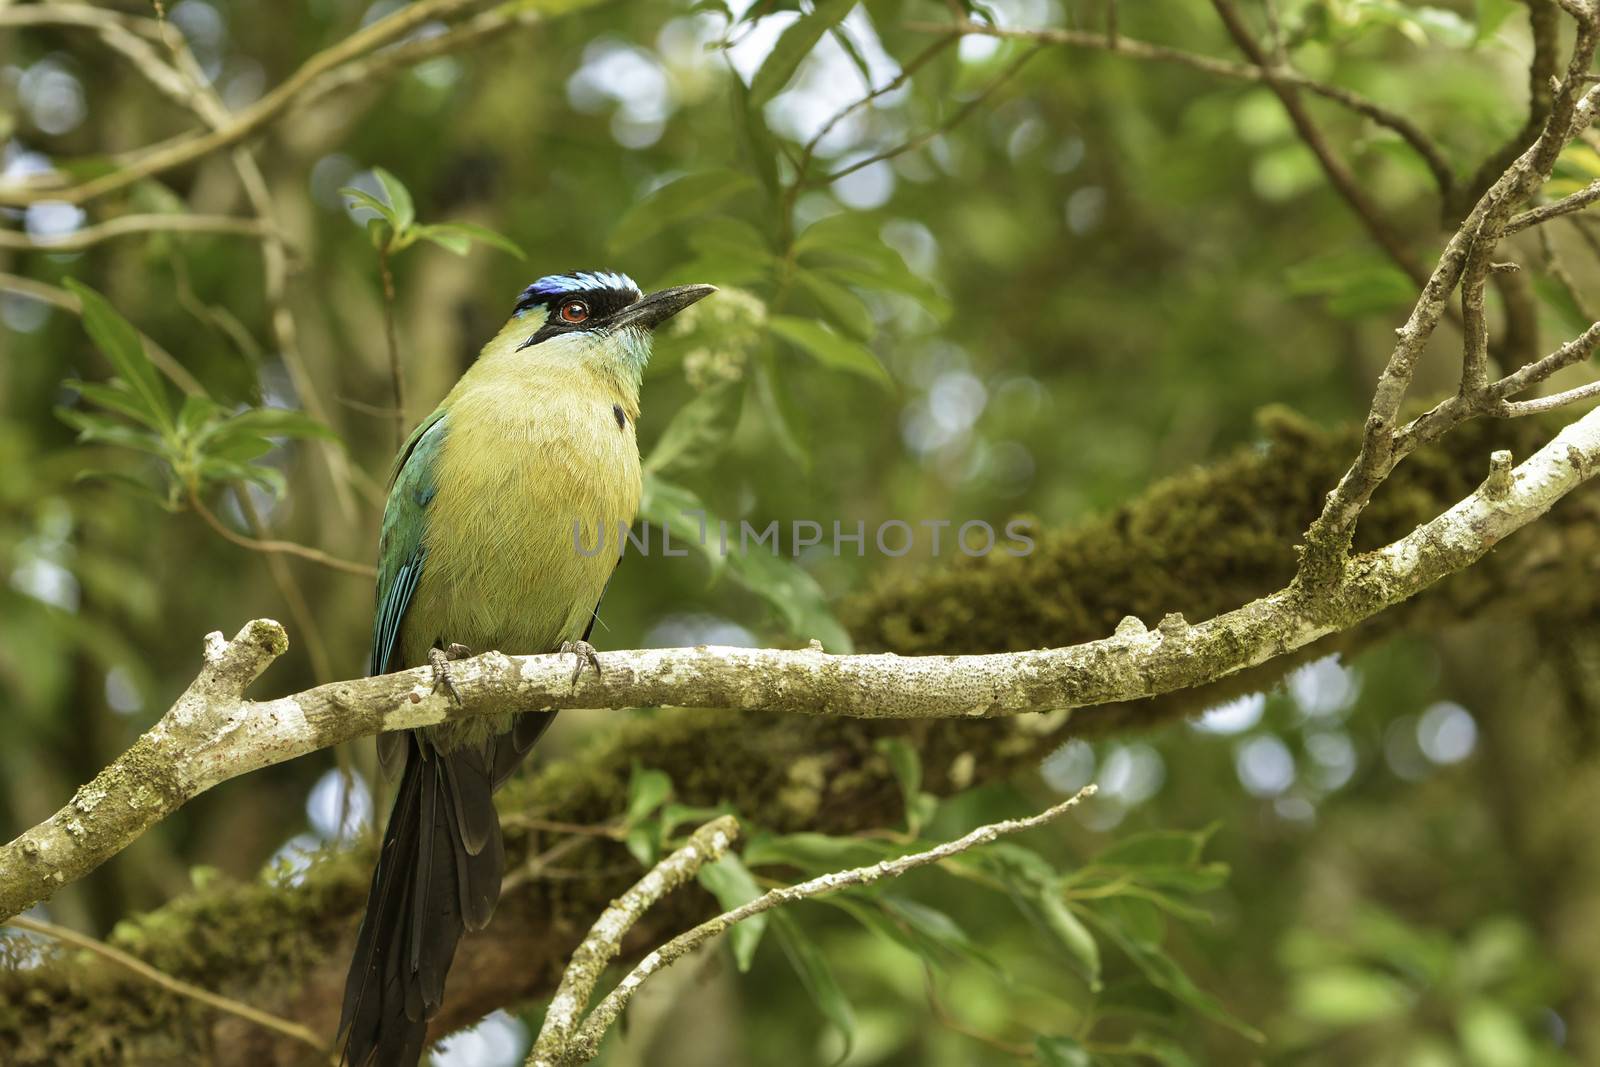 Closeup of a blue-crowned motmot photographed in Costa Rica.